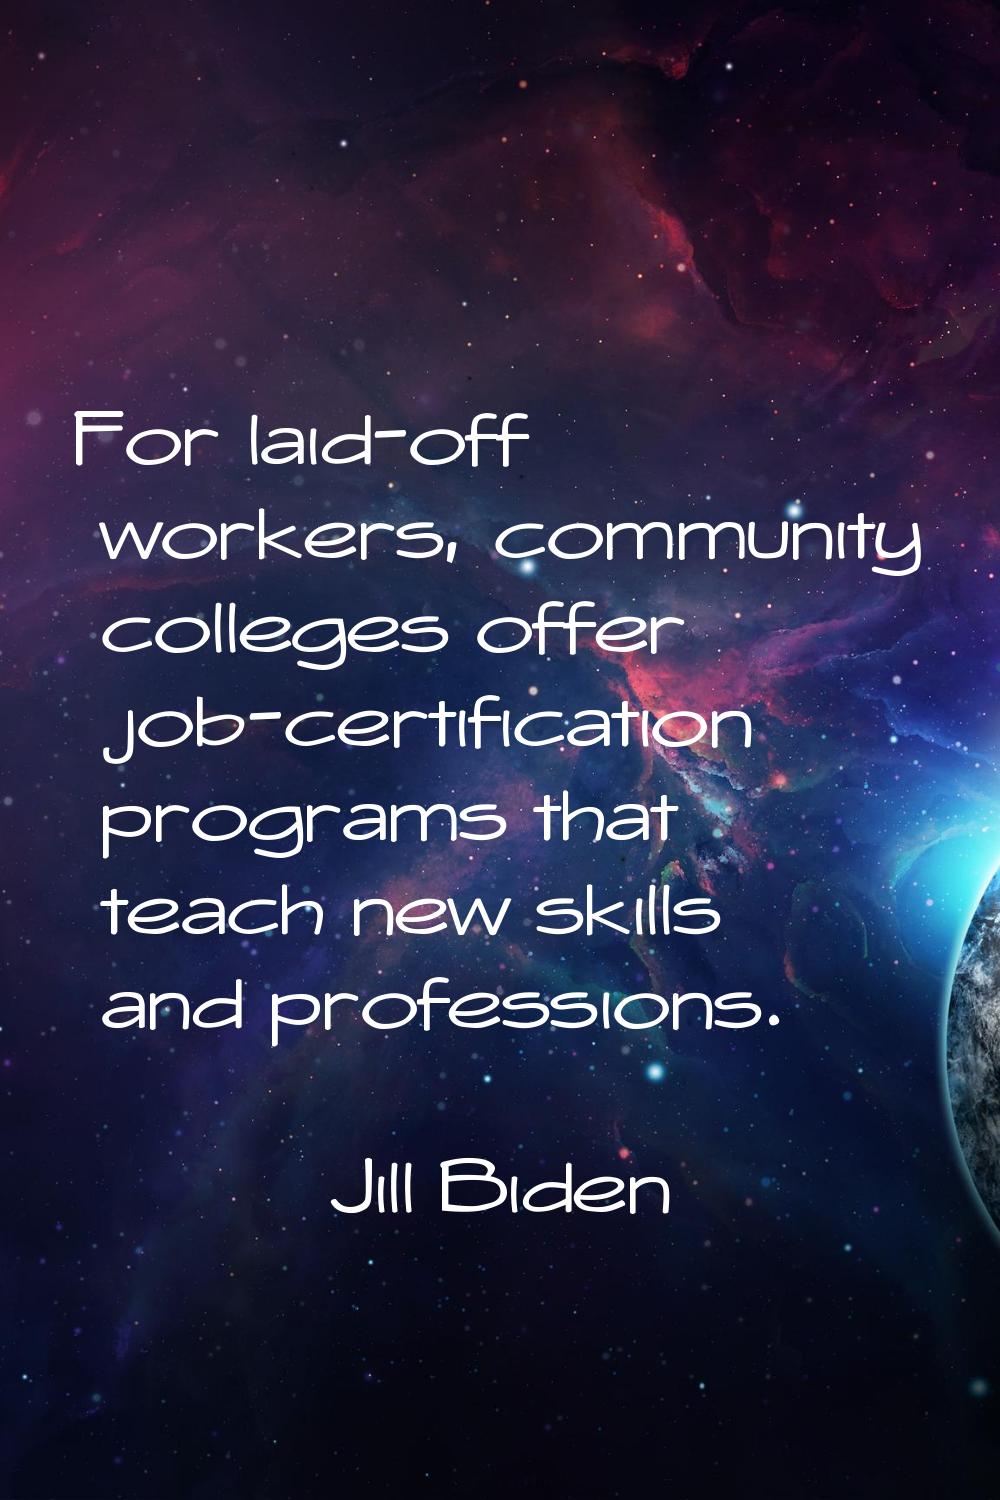 For laid-off workers, community colleges offer job-certification programs that teach new skills and